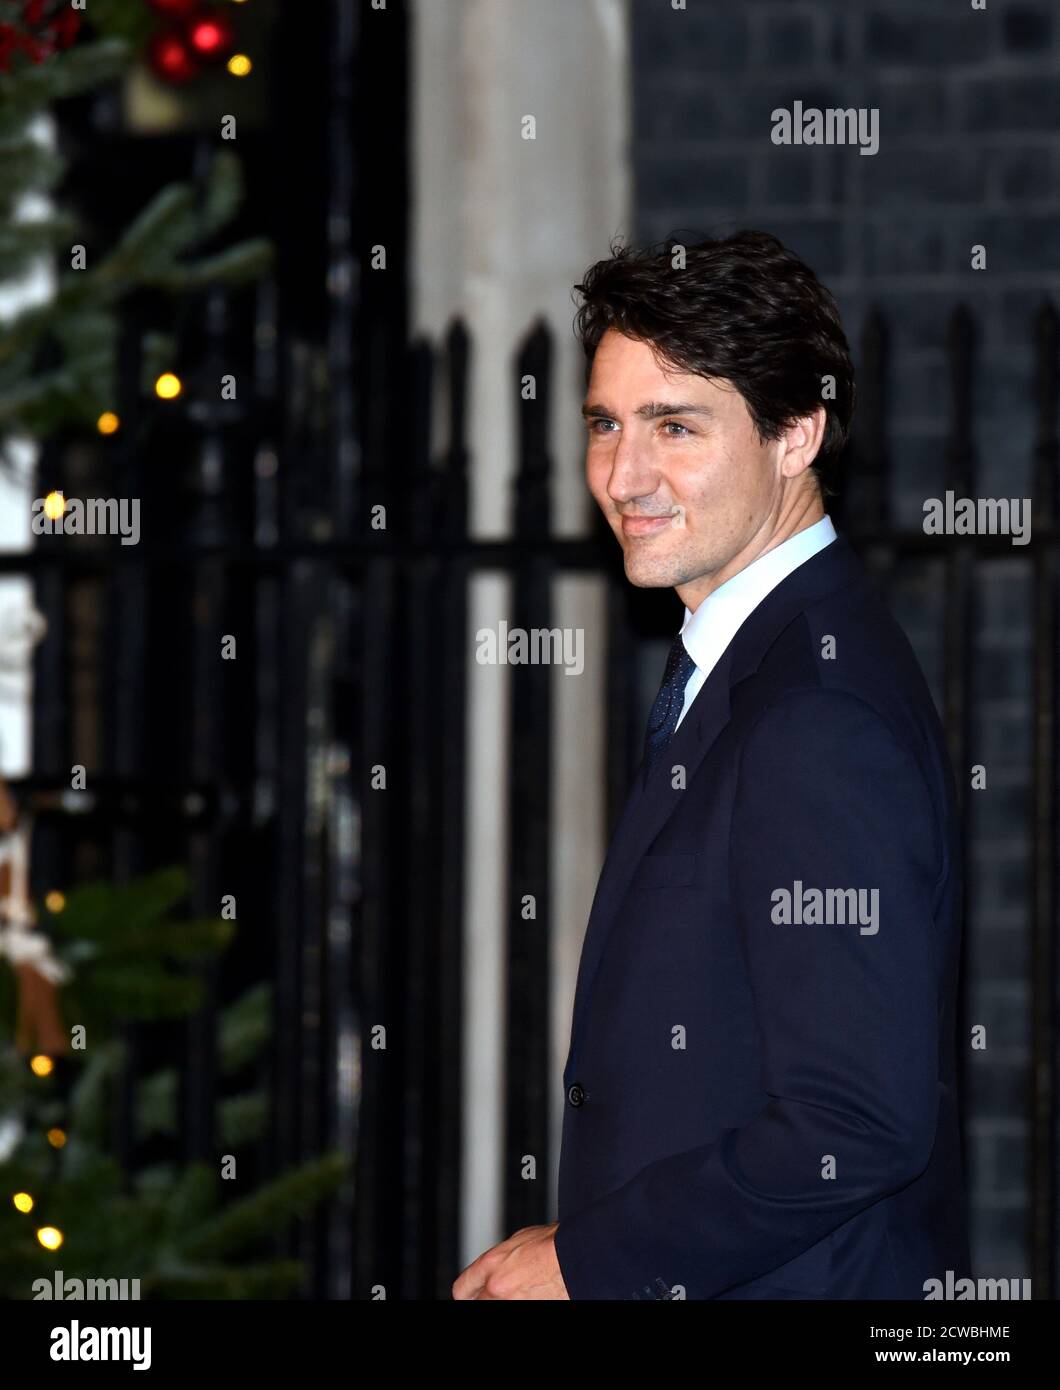 Photograph of Justin Trudeau, Prime Minister of Canada, attending the NATO Summit in London, December 2019 Stock Photo